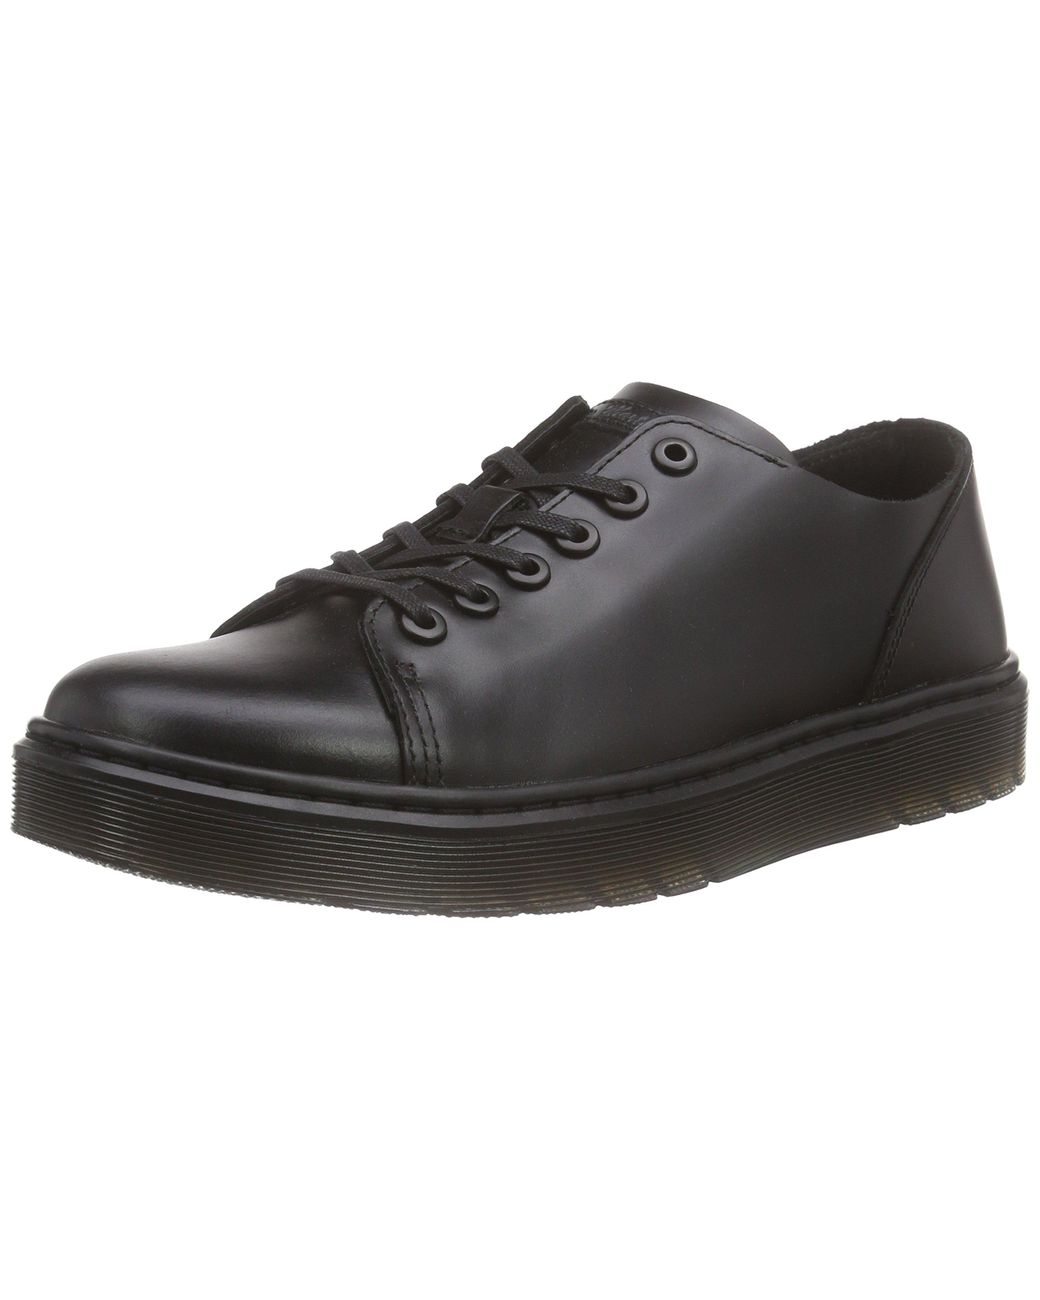 Dr. Martens Synthetic Dante Oxford in Black - Save 20% - Lyst